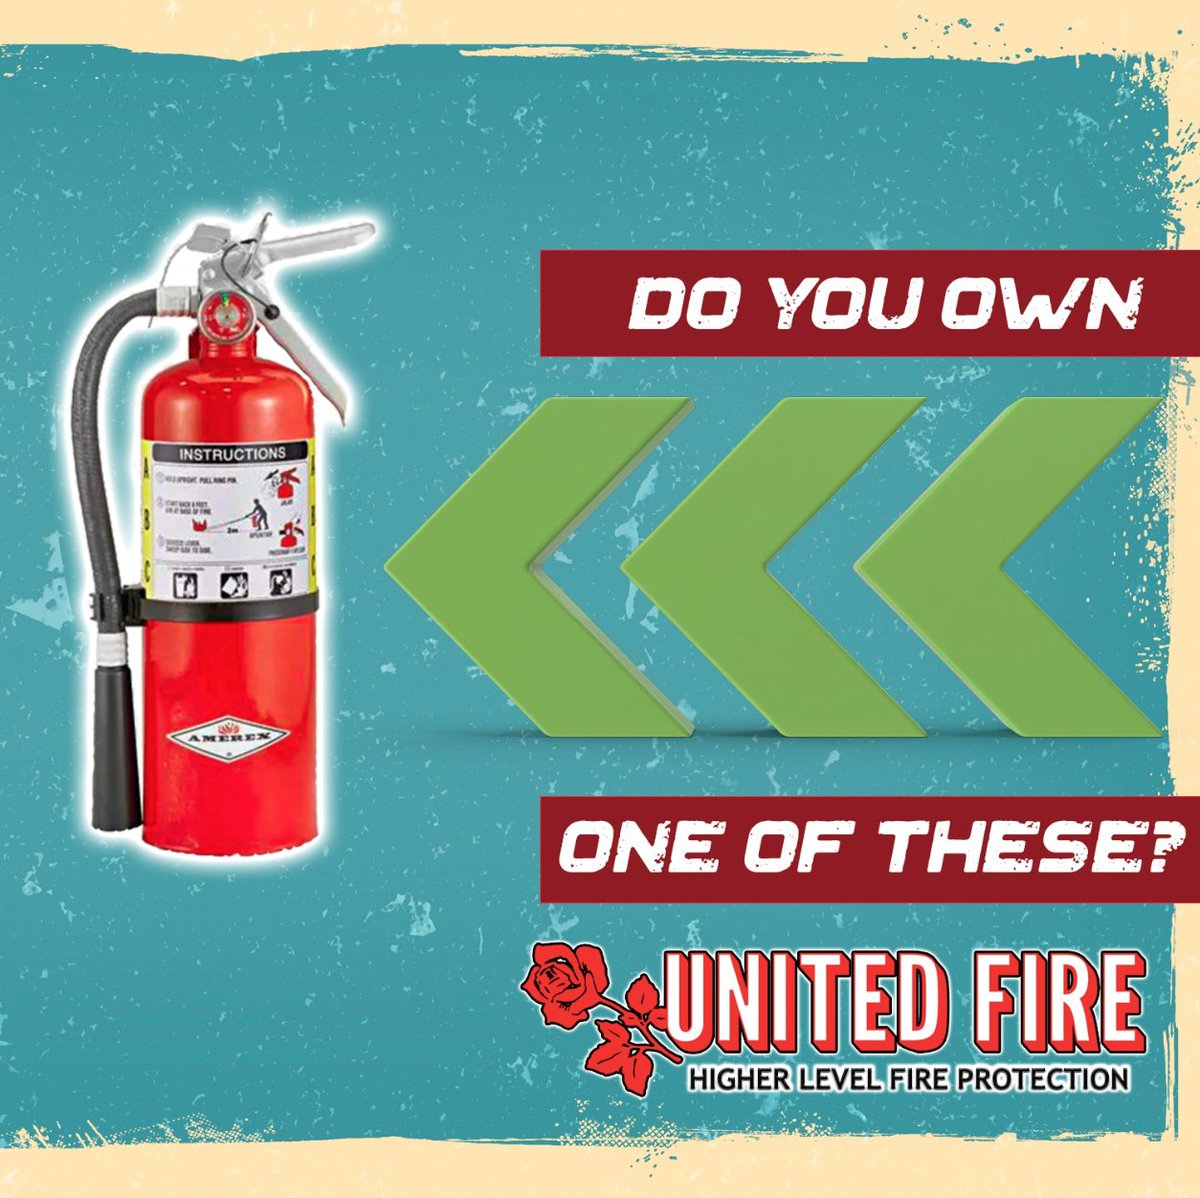 Do you own a fire extinguisher? If not, why not? A portable fire extinguisher can save your family, home, boat, car, etc. They are very inexpensive and easy to use. We urge you to take action and buy a fire extinguisher. #fireextinguisherservice #fireextinguishermaintenance